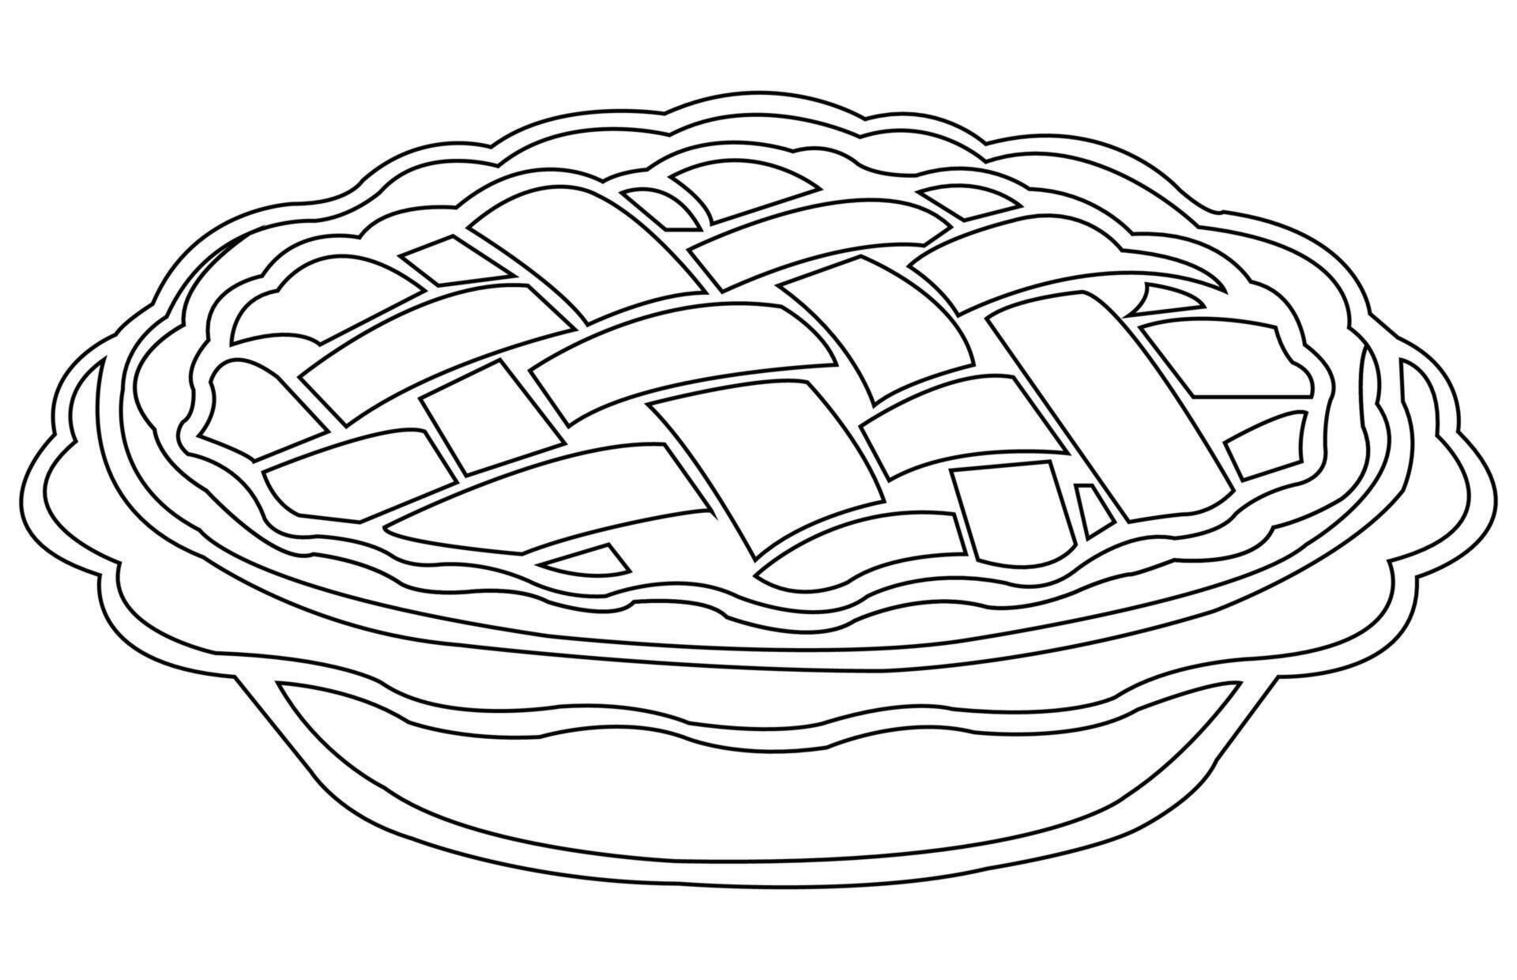 Apple Pie outline icon, Hand drawn vector outline of apple pie.